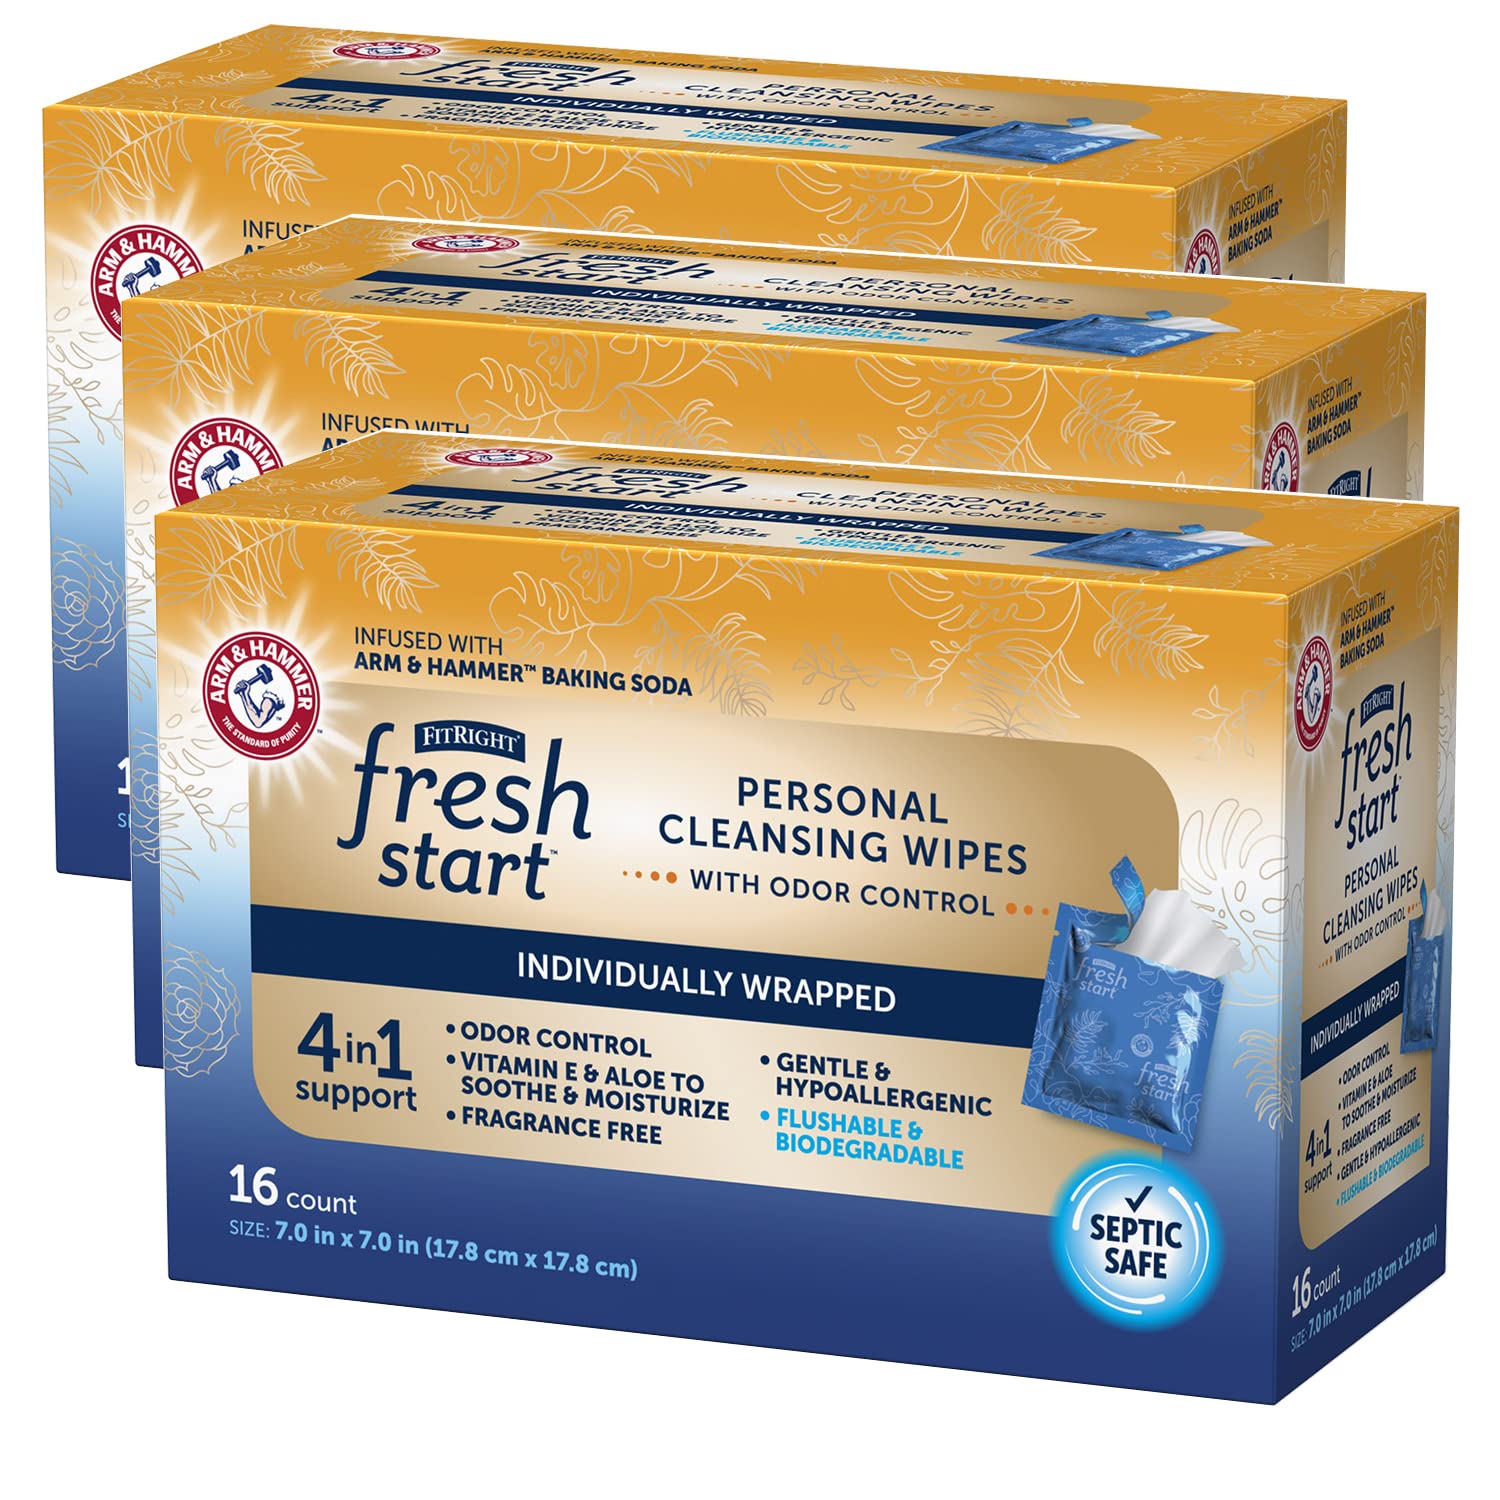 FitRight Fresh Start On-The-Go Flushable Wipes (48 Count), Personal Cleansing Wipes, Individually Wrapped Sachets for Urinary Incontinence with The Odor-Control Power of ARM & Hammer Baking Soda